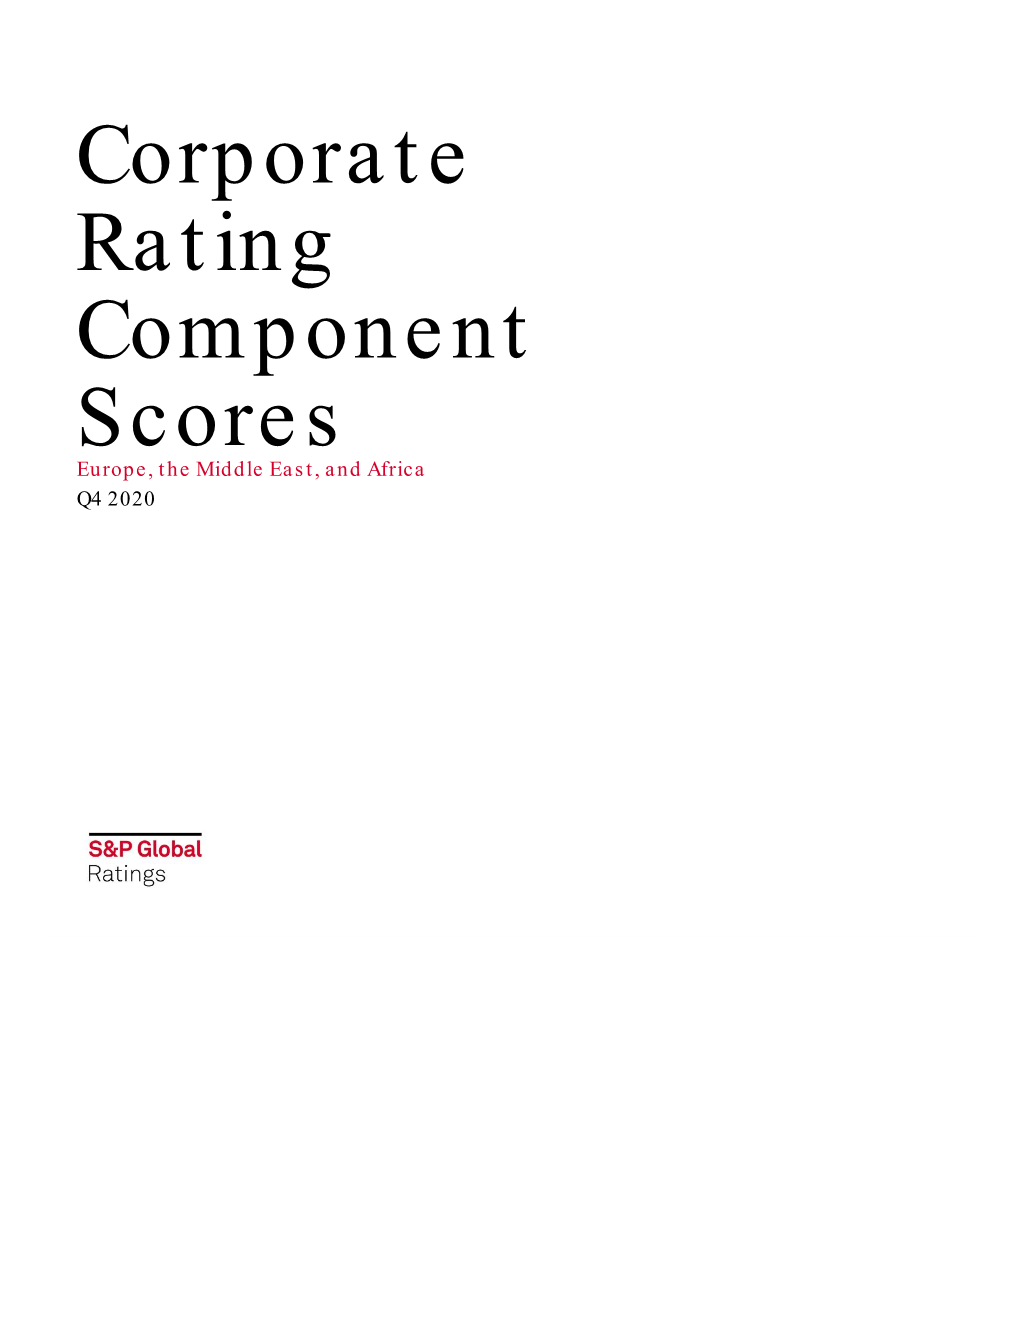 Corporate Rating Component Scores Europe, the Middle East, and Africa Q4 2020